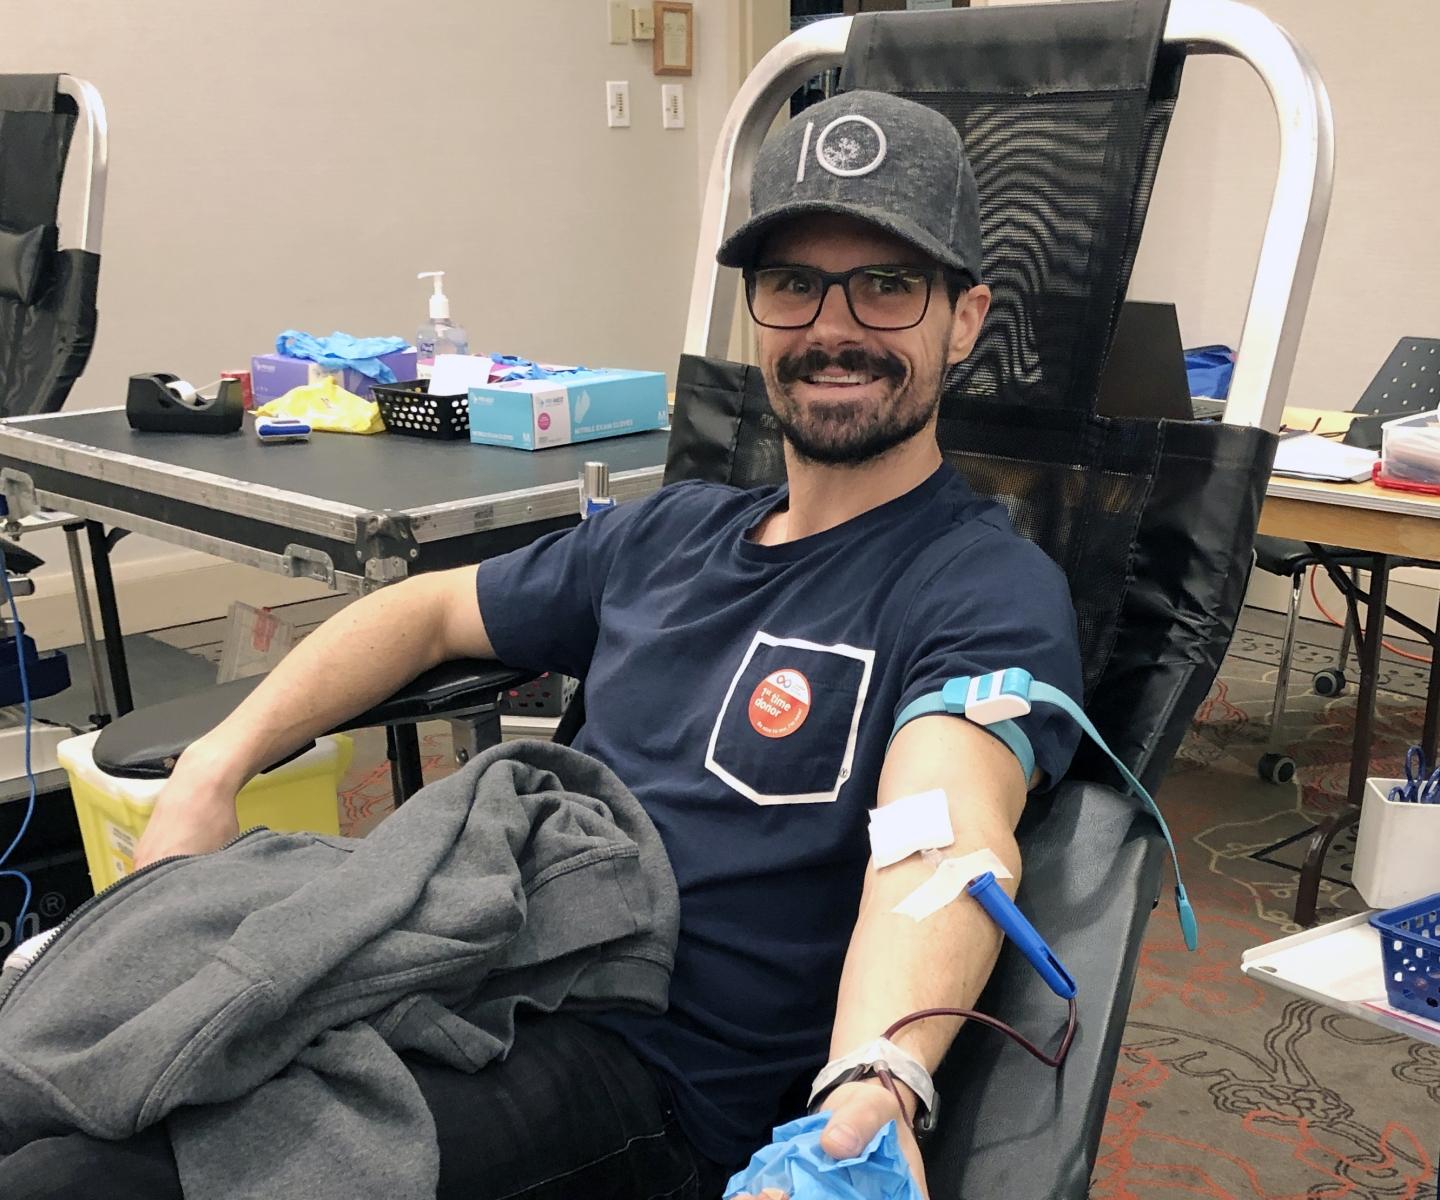 Man in baseball cap with first time donor sticker donating blood